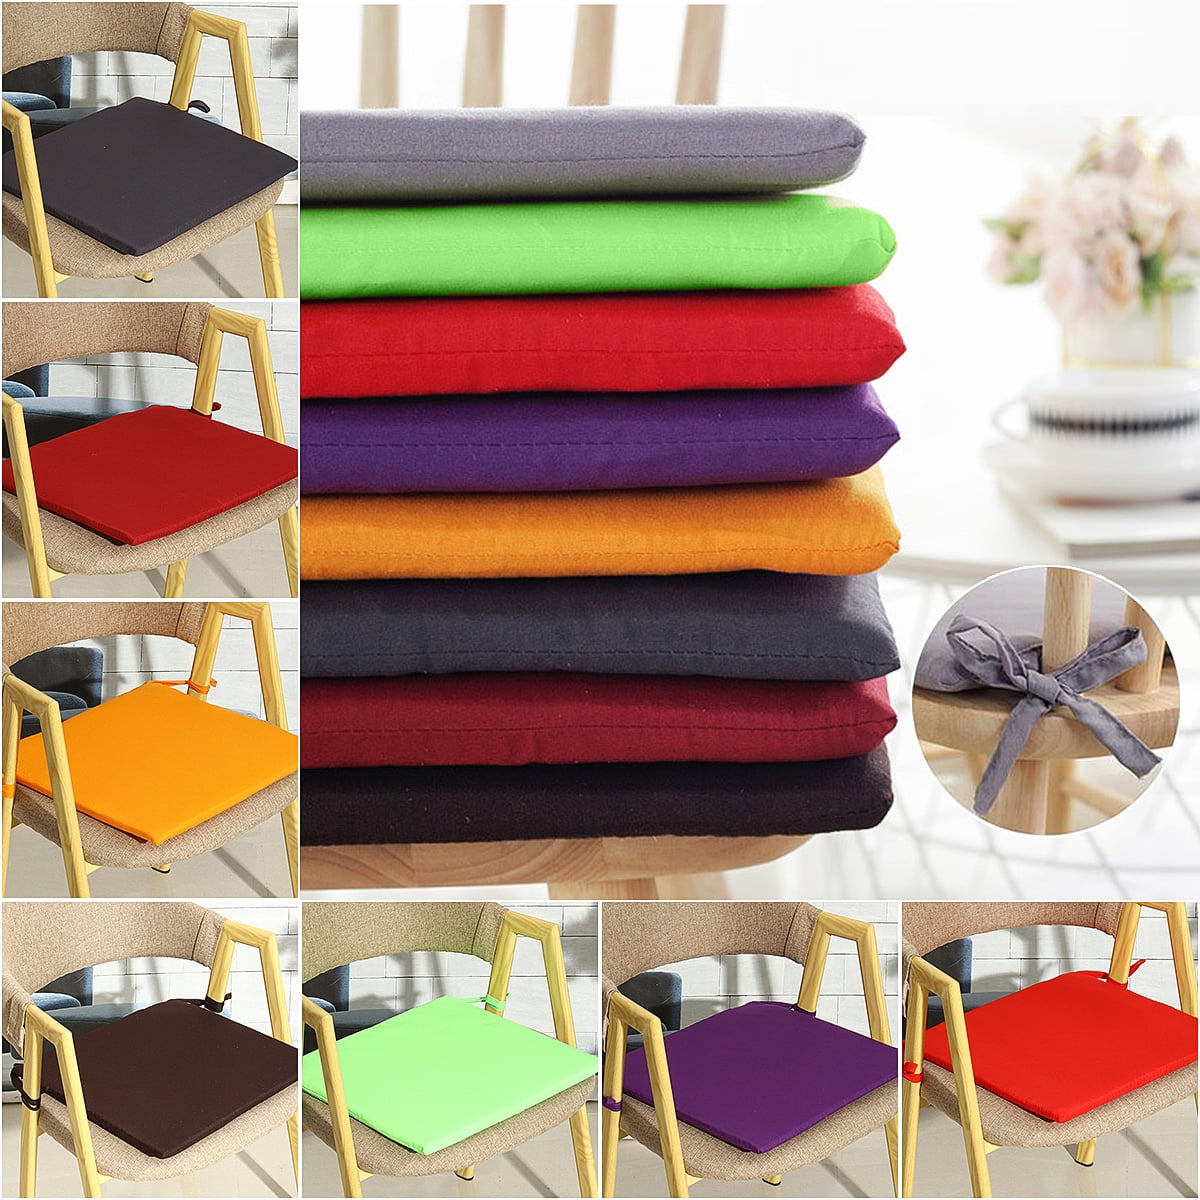 4x Home Office Soft Chair Seat Cushion Pad Floor Mat Garden Dining Room Patio 